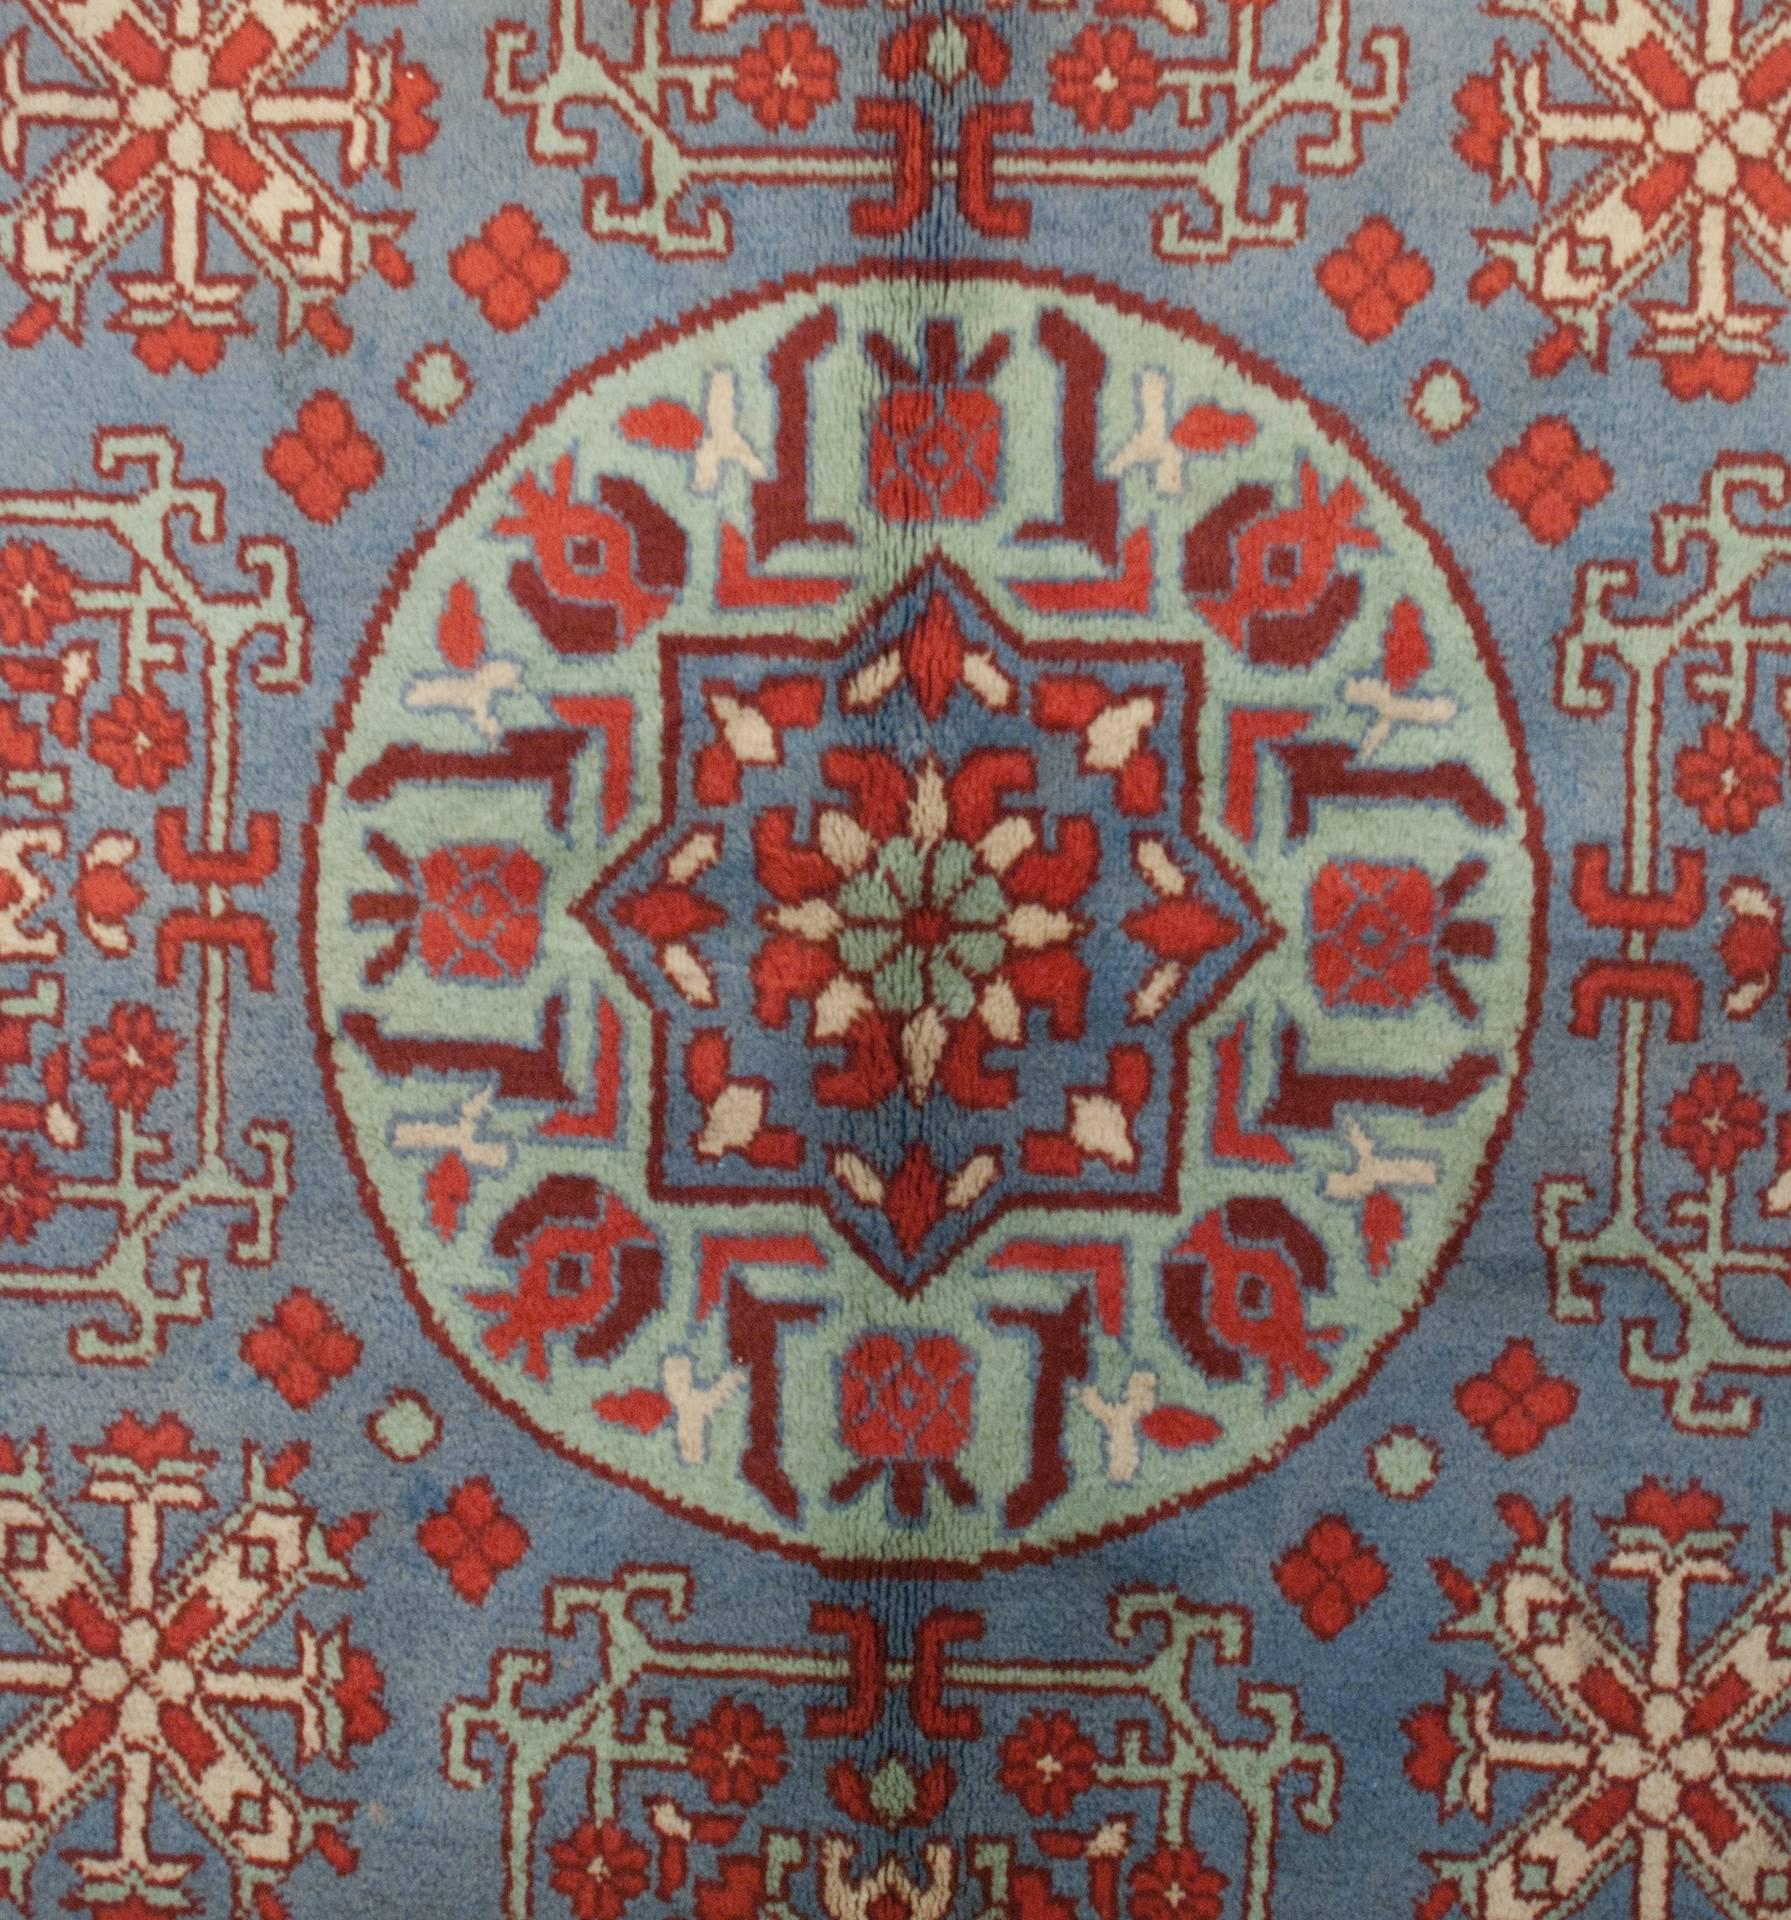 An unusual late 20th century central Asian Samarkand rug woven with multiple shades of indigo beginning with a large light-blue central medallion with a stylized pomegranate motif, on a larger dark-blue field with multiple floral and geometric